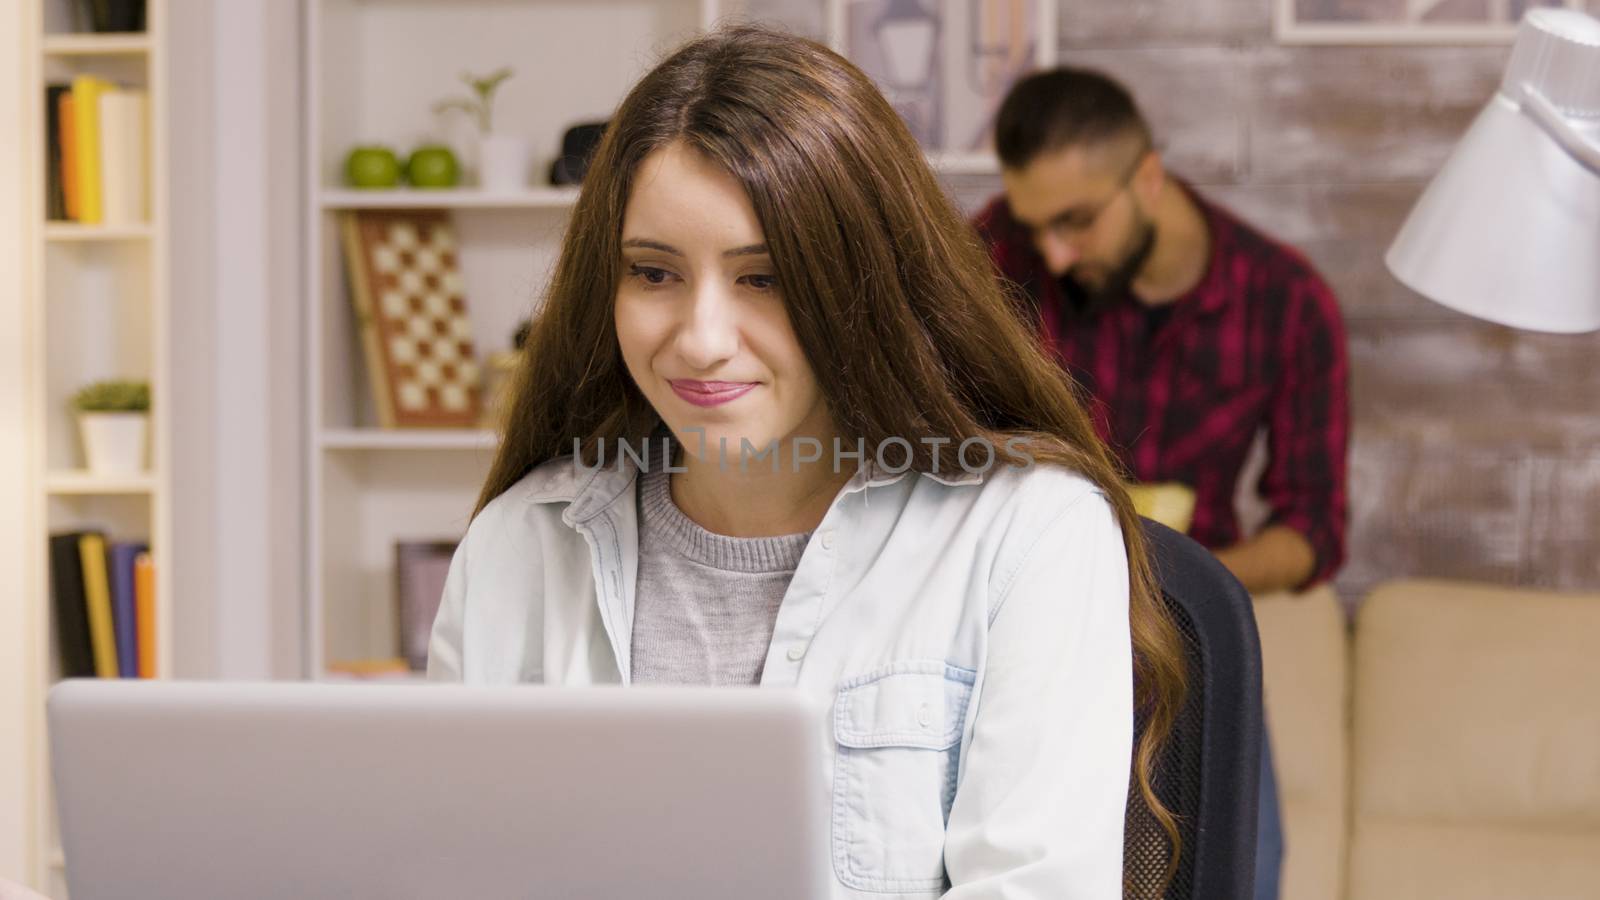 Girl enjoying a cup of coffee while working on laptop in living room. Boyfriend in the background eats chips.